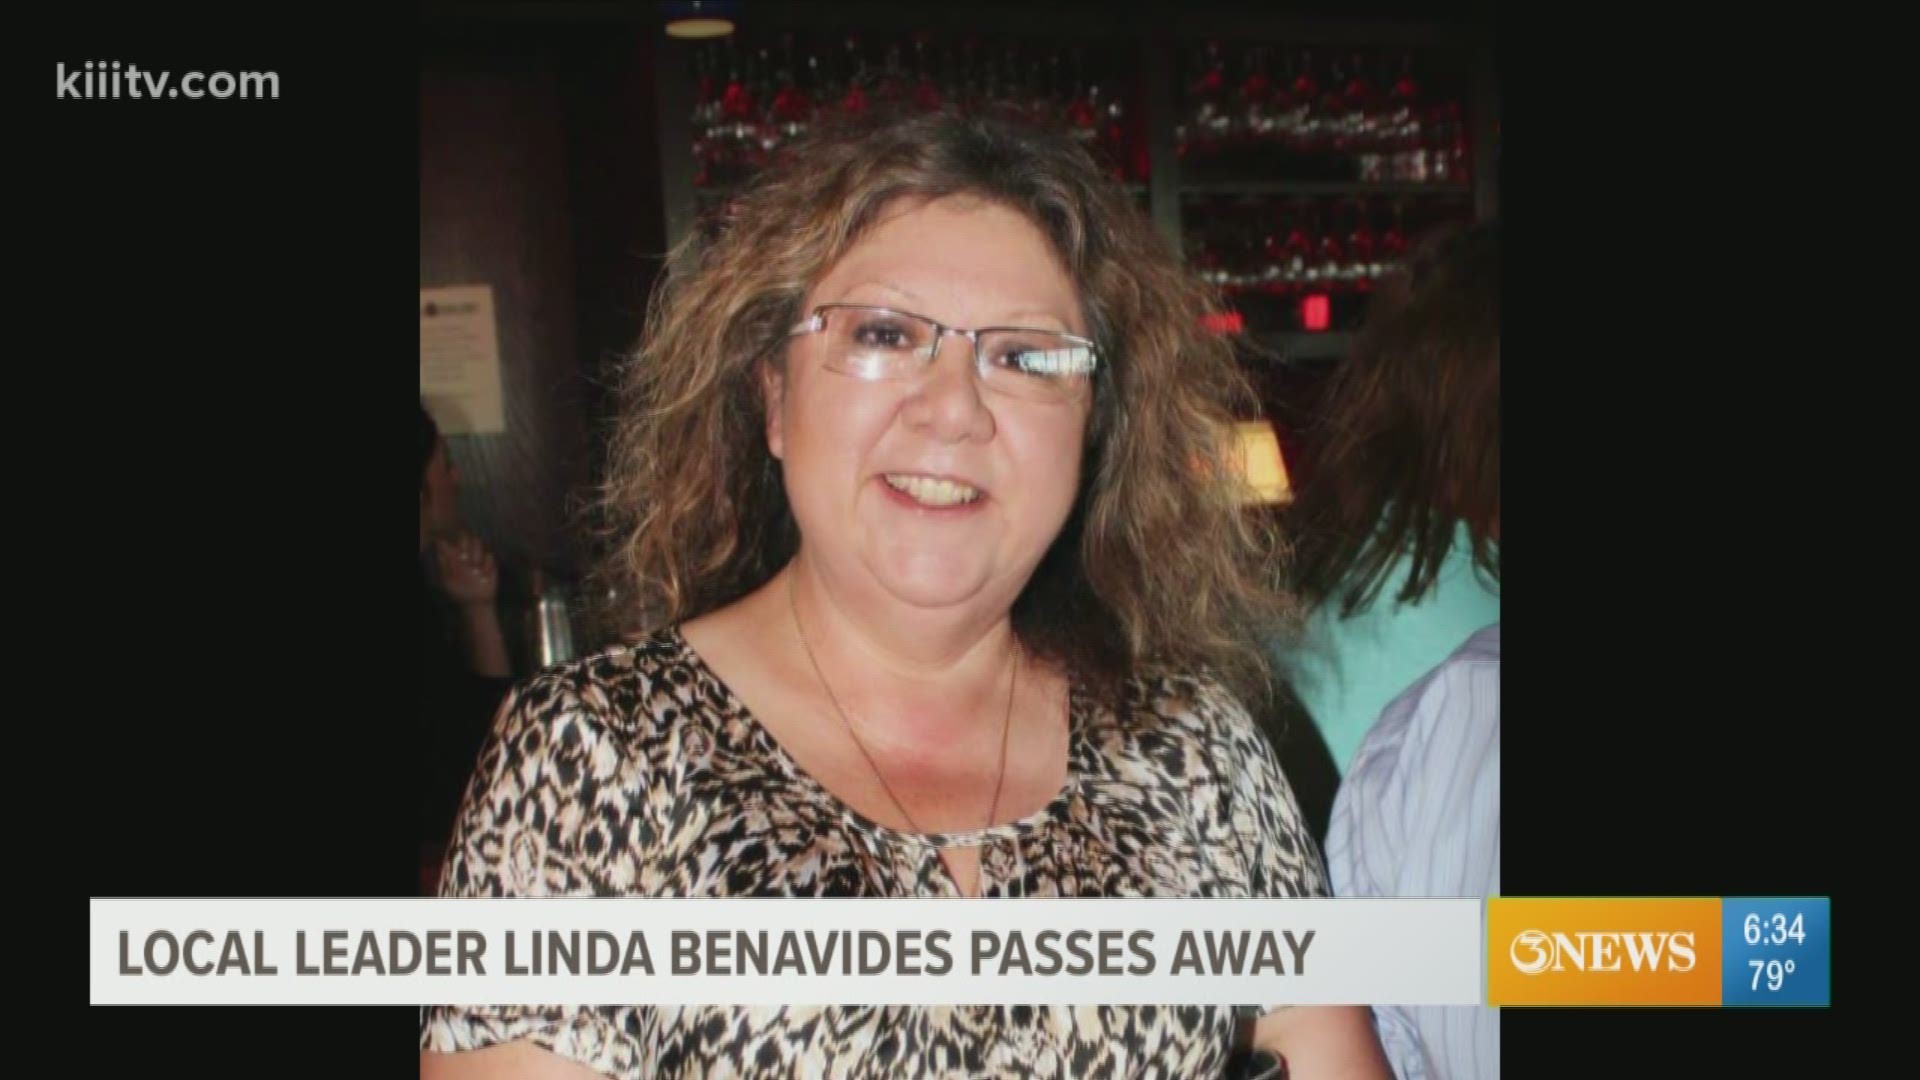 Linda Benavides died Wednesday morning after recovering from open heart surgery, according to family.